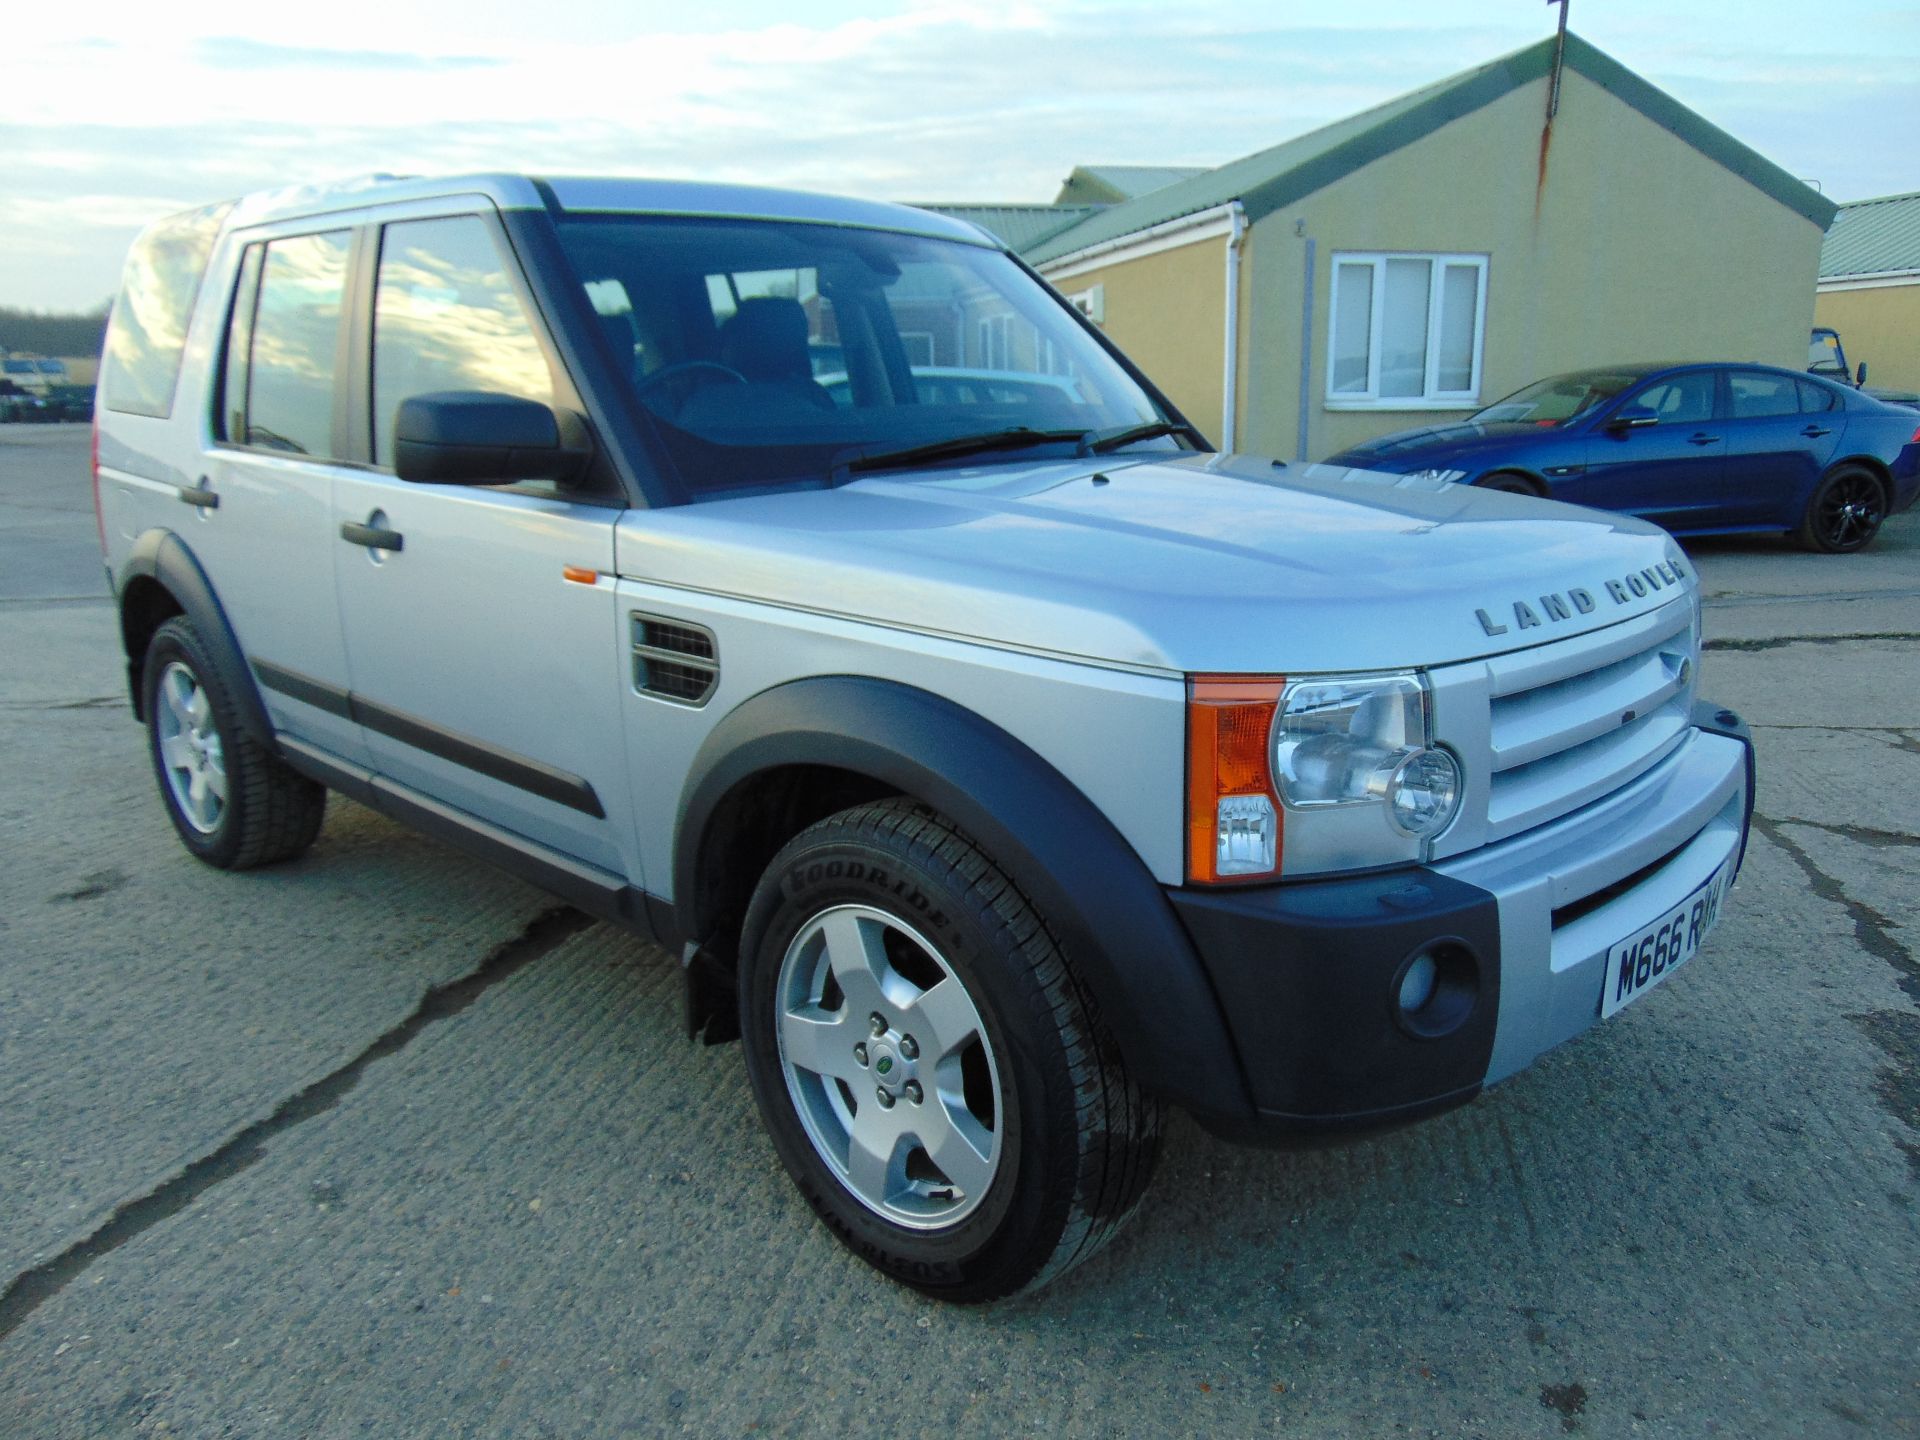 2006 Land Rover Discovery 3 2.7 TDV6 S Auto - Image 2 of 21